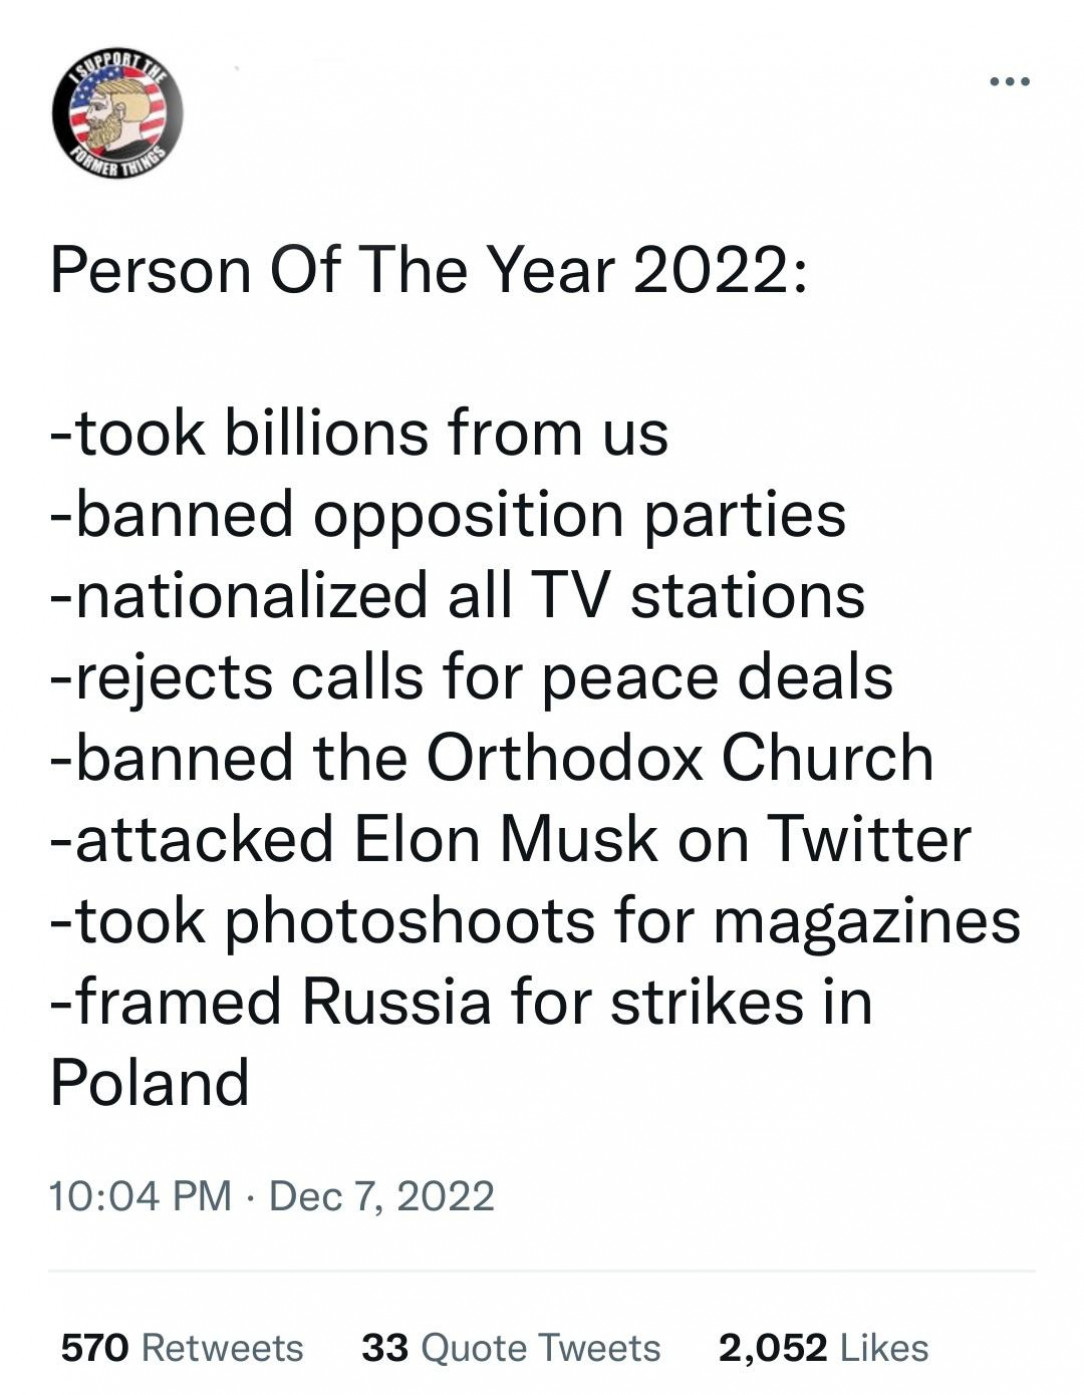 “Attacked Elon Musk”. This person is actually serious